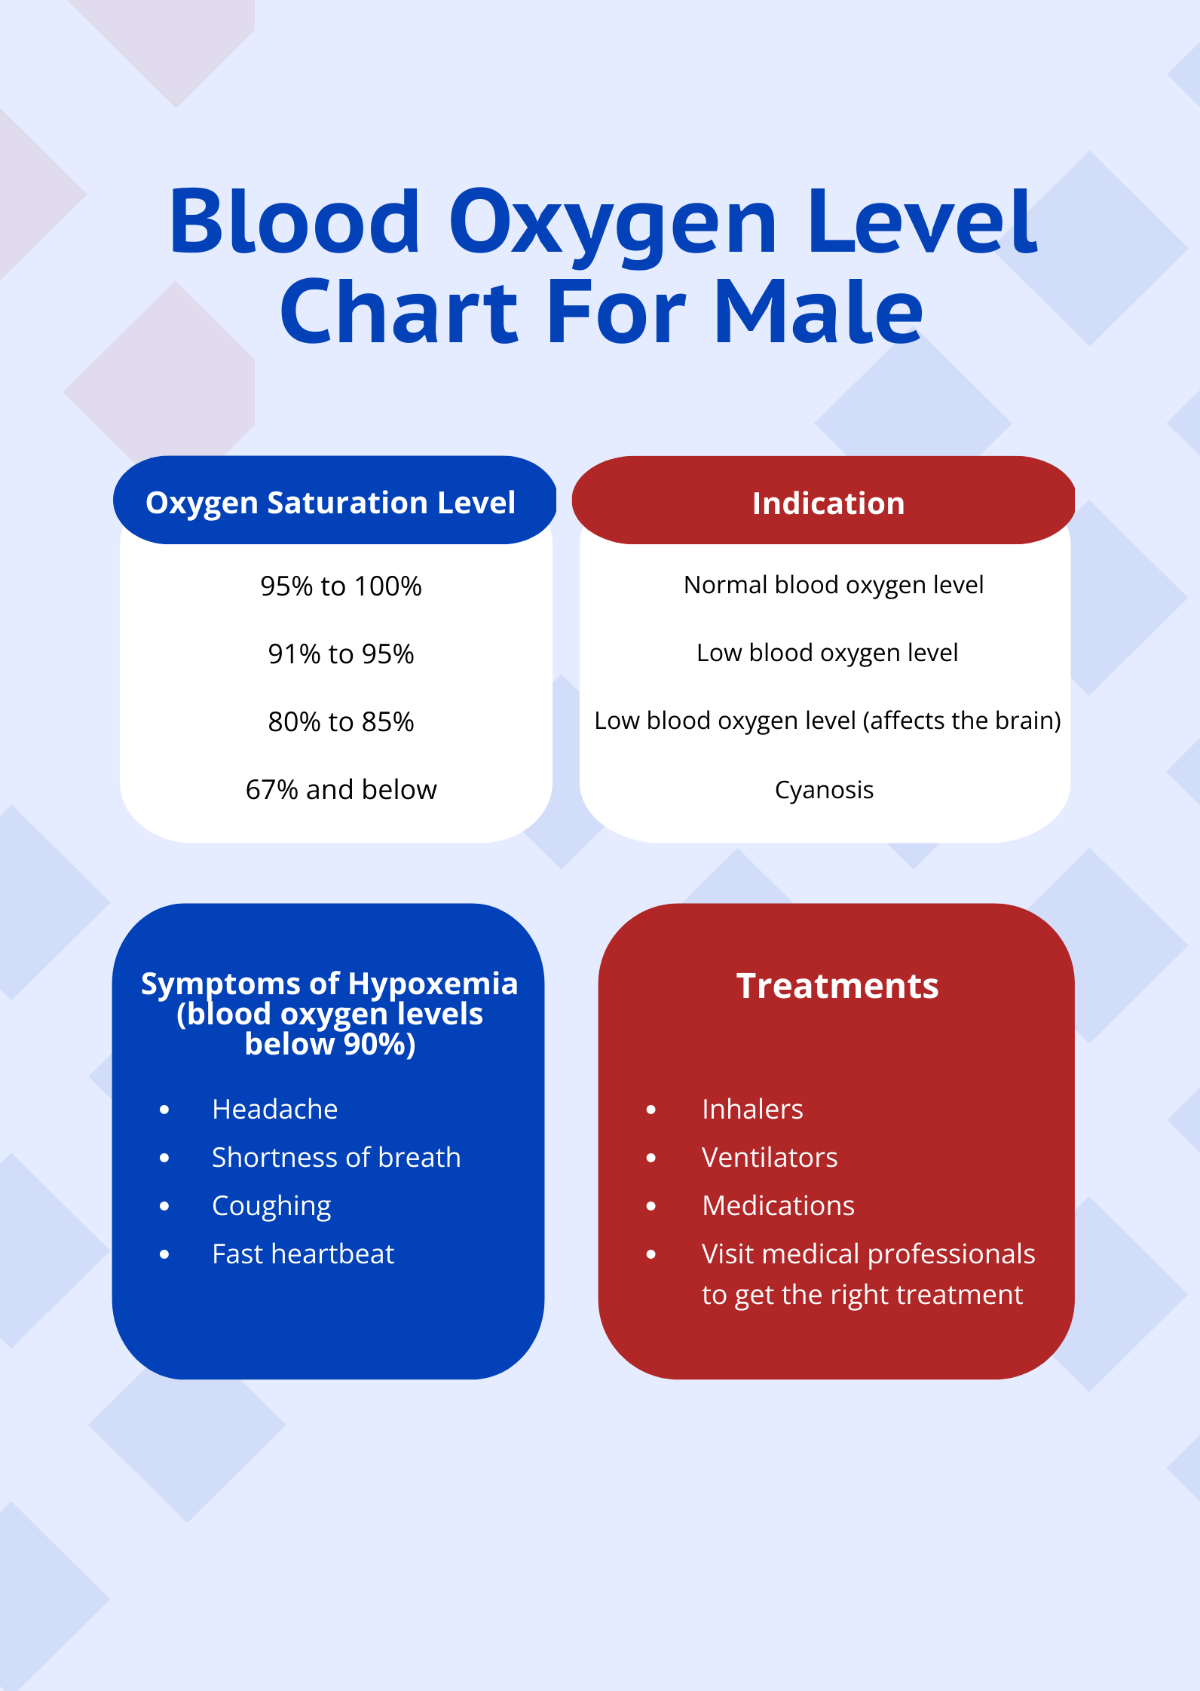 Blood Oxygen Level Chart For Male